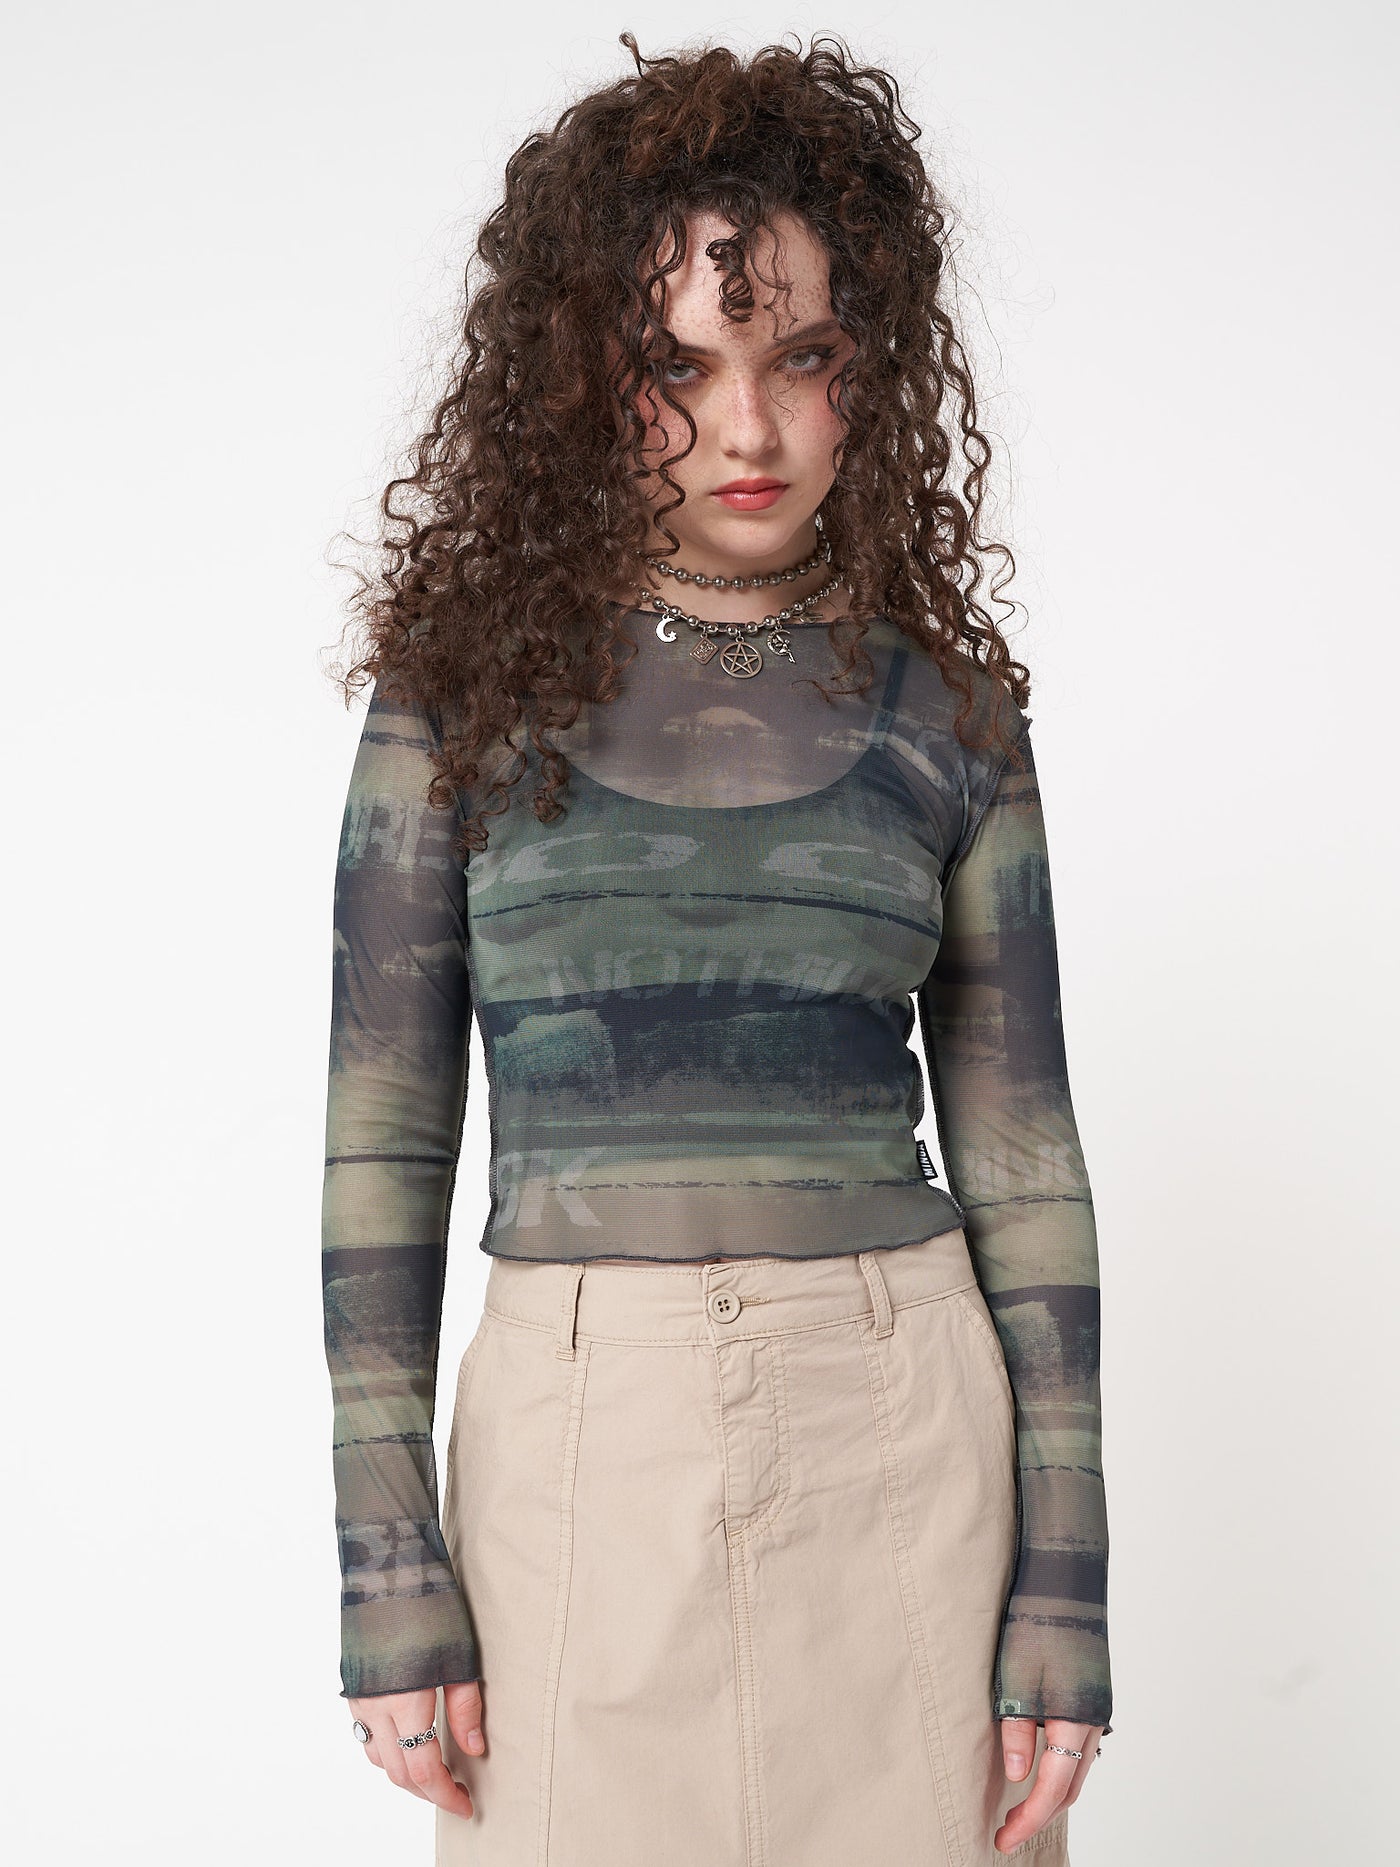 Printed mesh top in green featuring all over grunge graphic print 